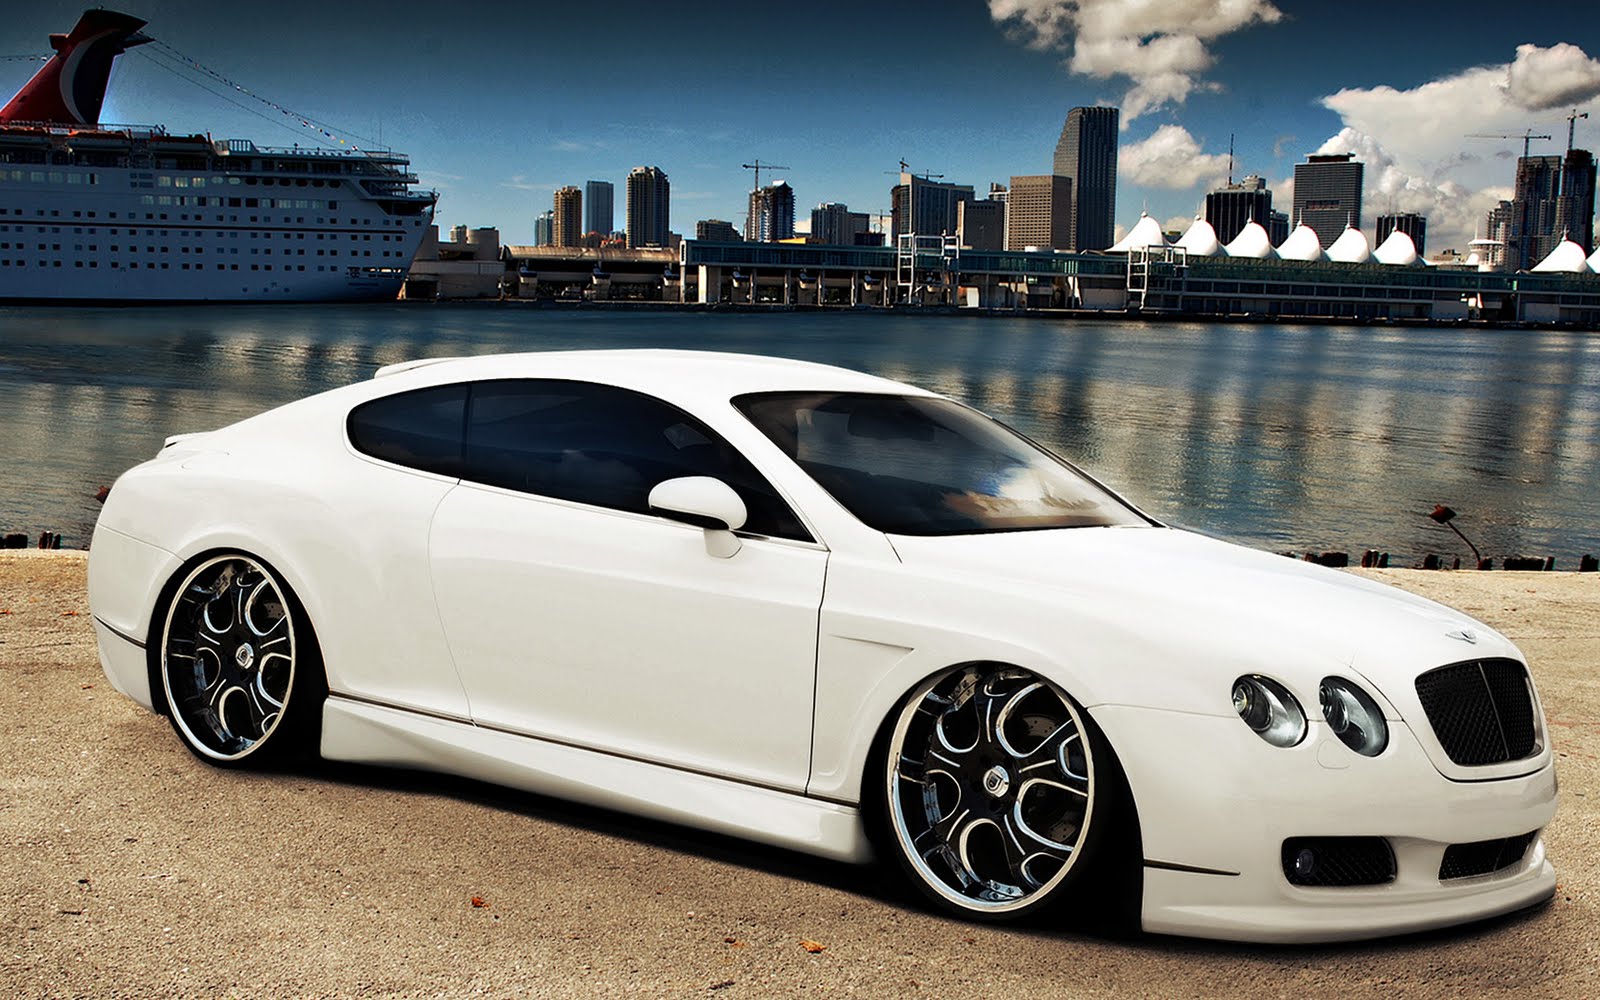  continental GT Tuning luxury car HD Wallpaper The Wallpaper Database 1600x1000